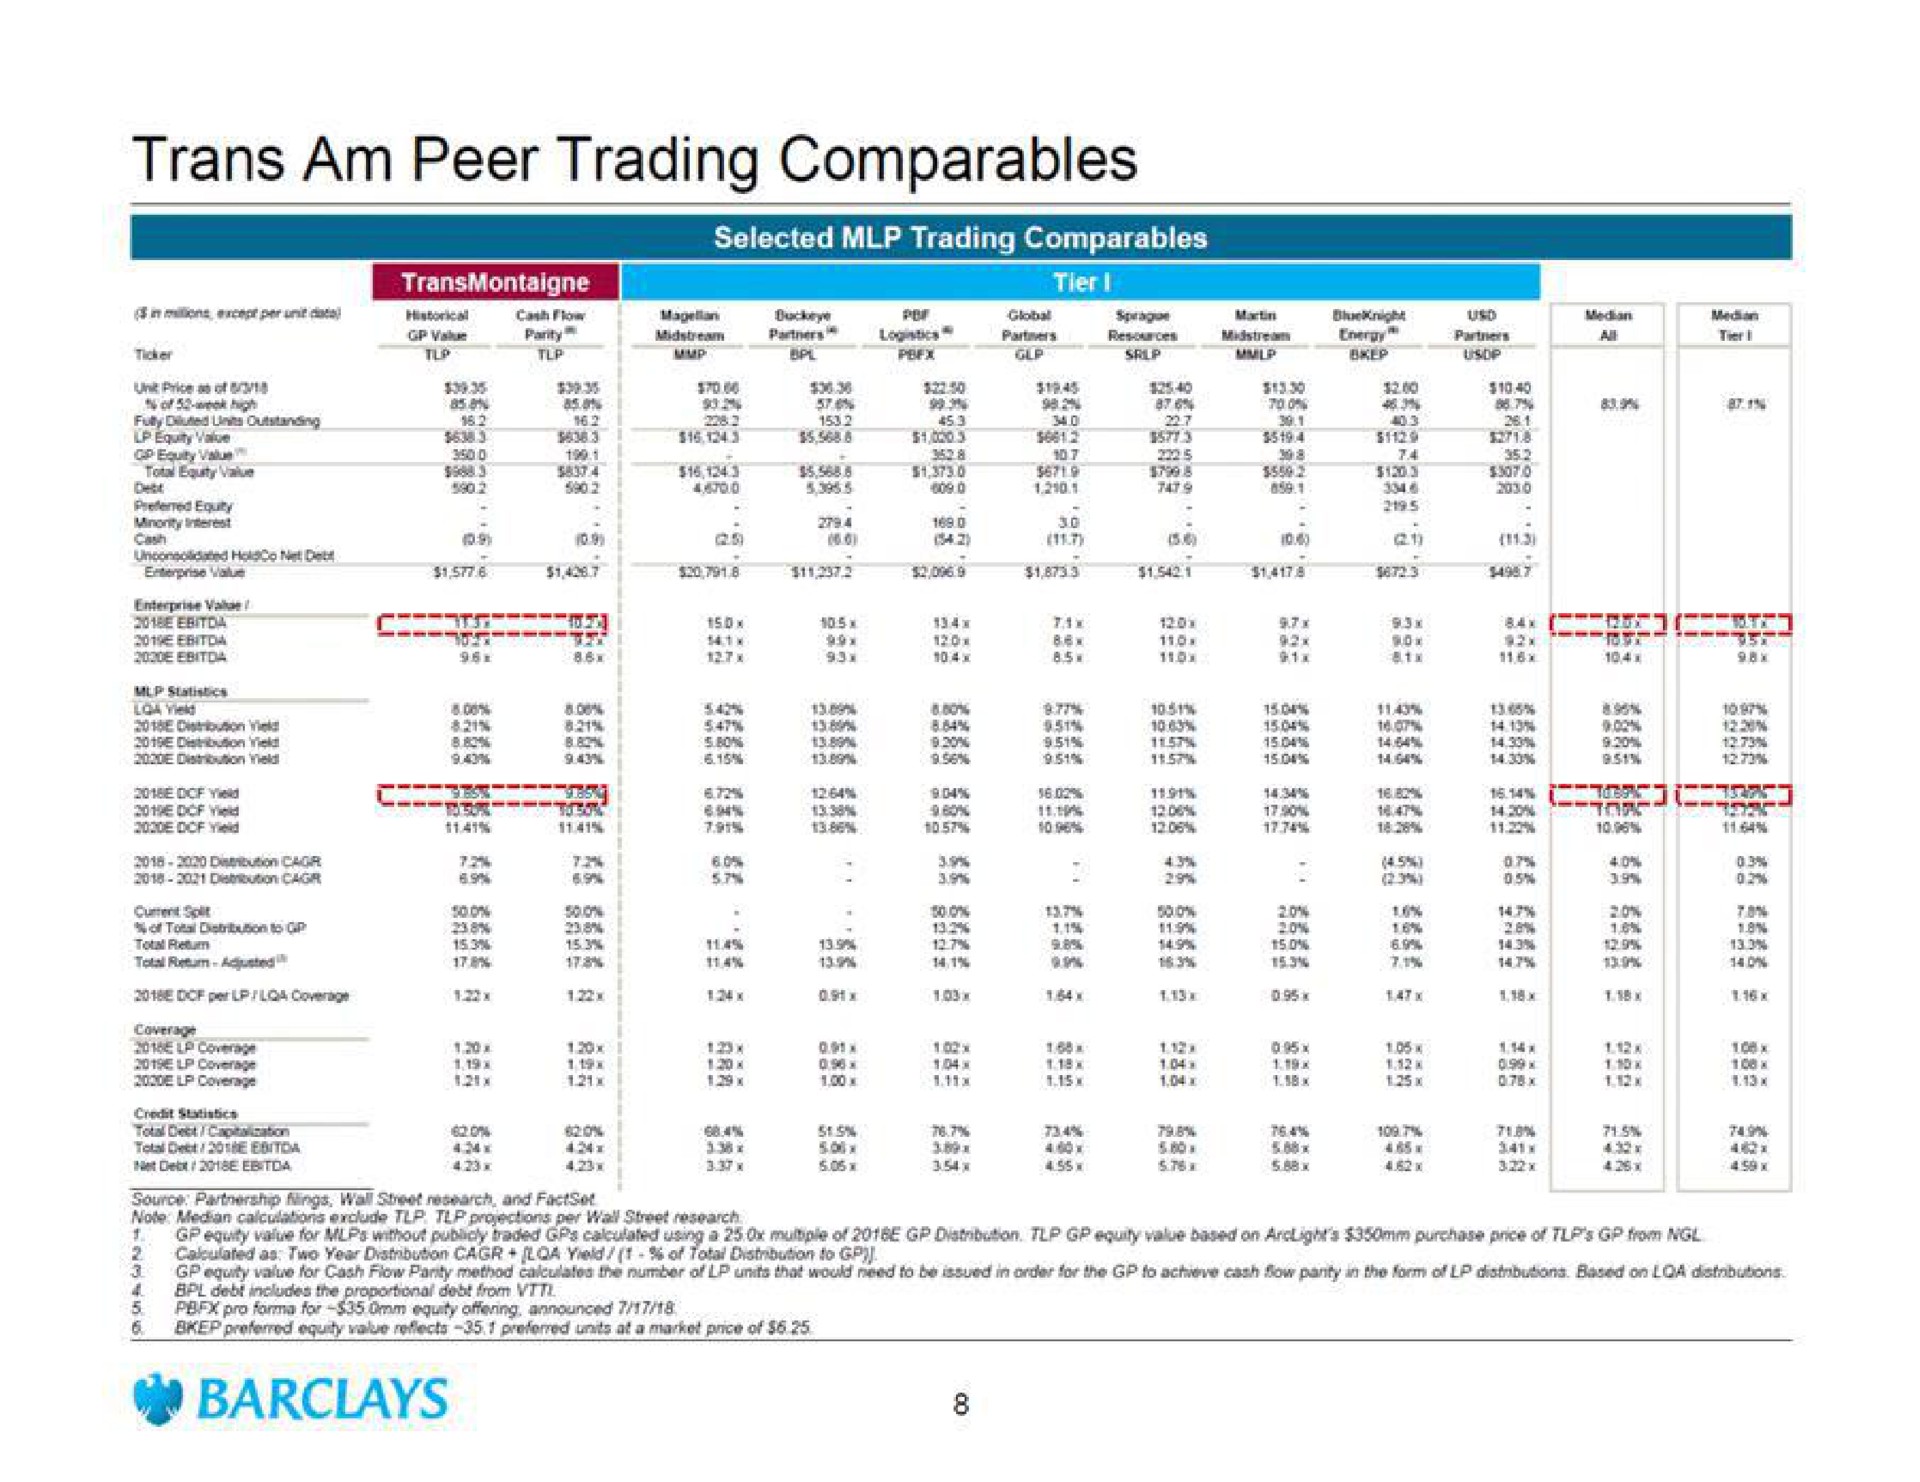 am peer trading selected trading | Barclays